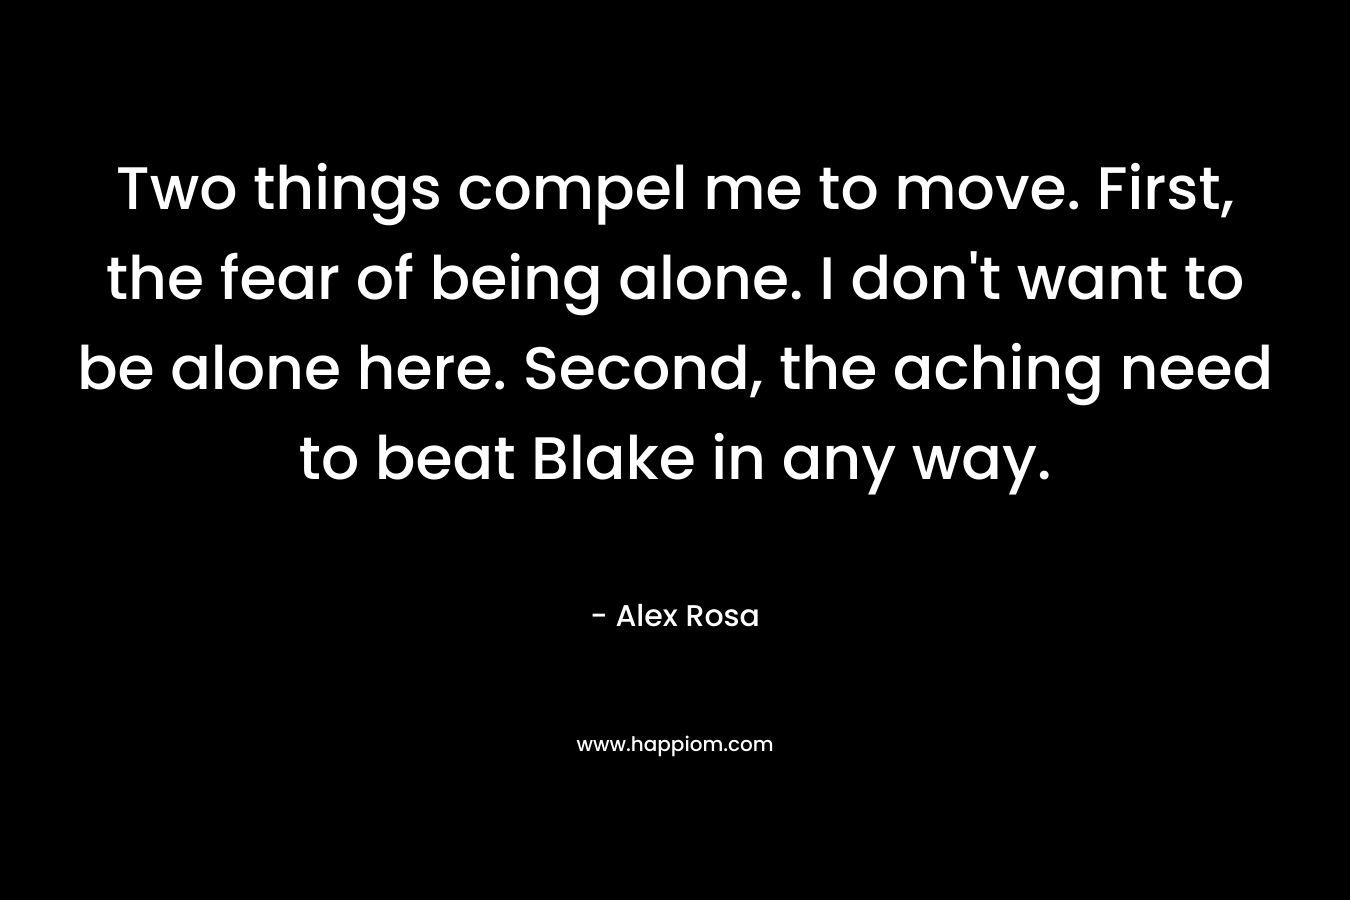 Two things compel me to move. First, the fear of being alone. I don't want to be alone here. Second, the aching need to beat Blake in any way.